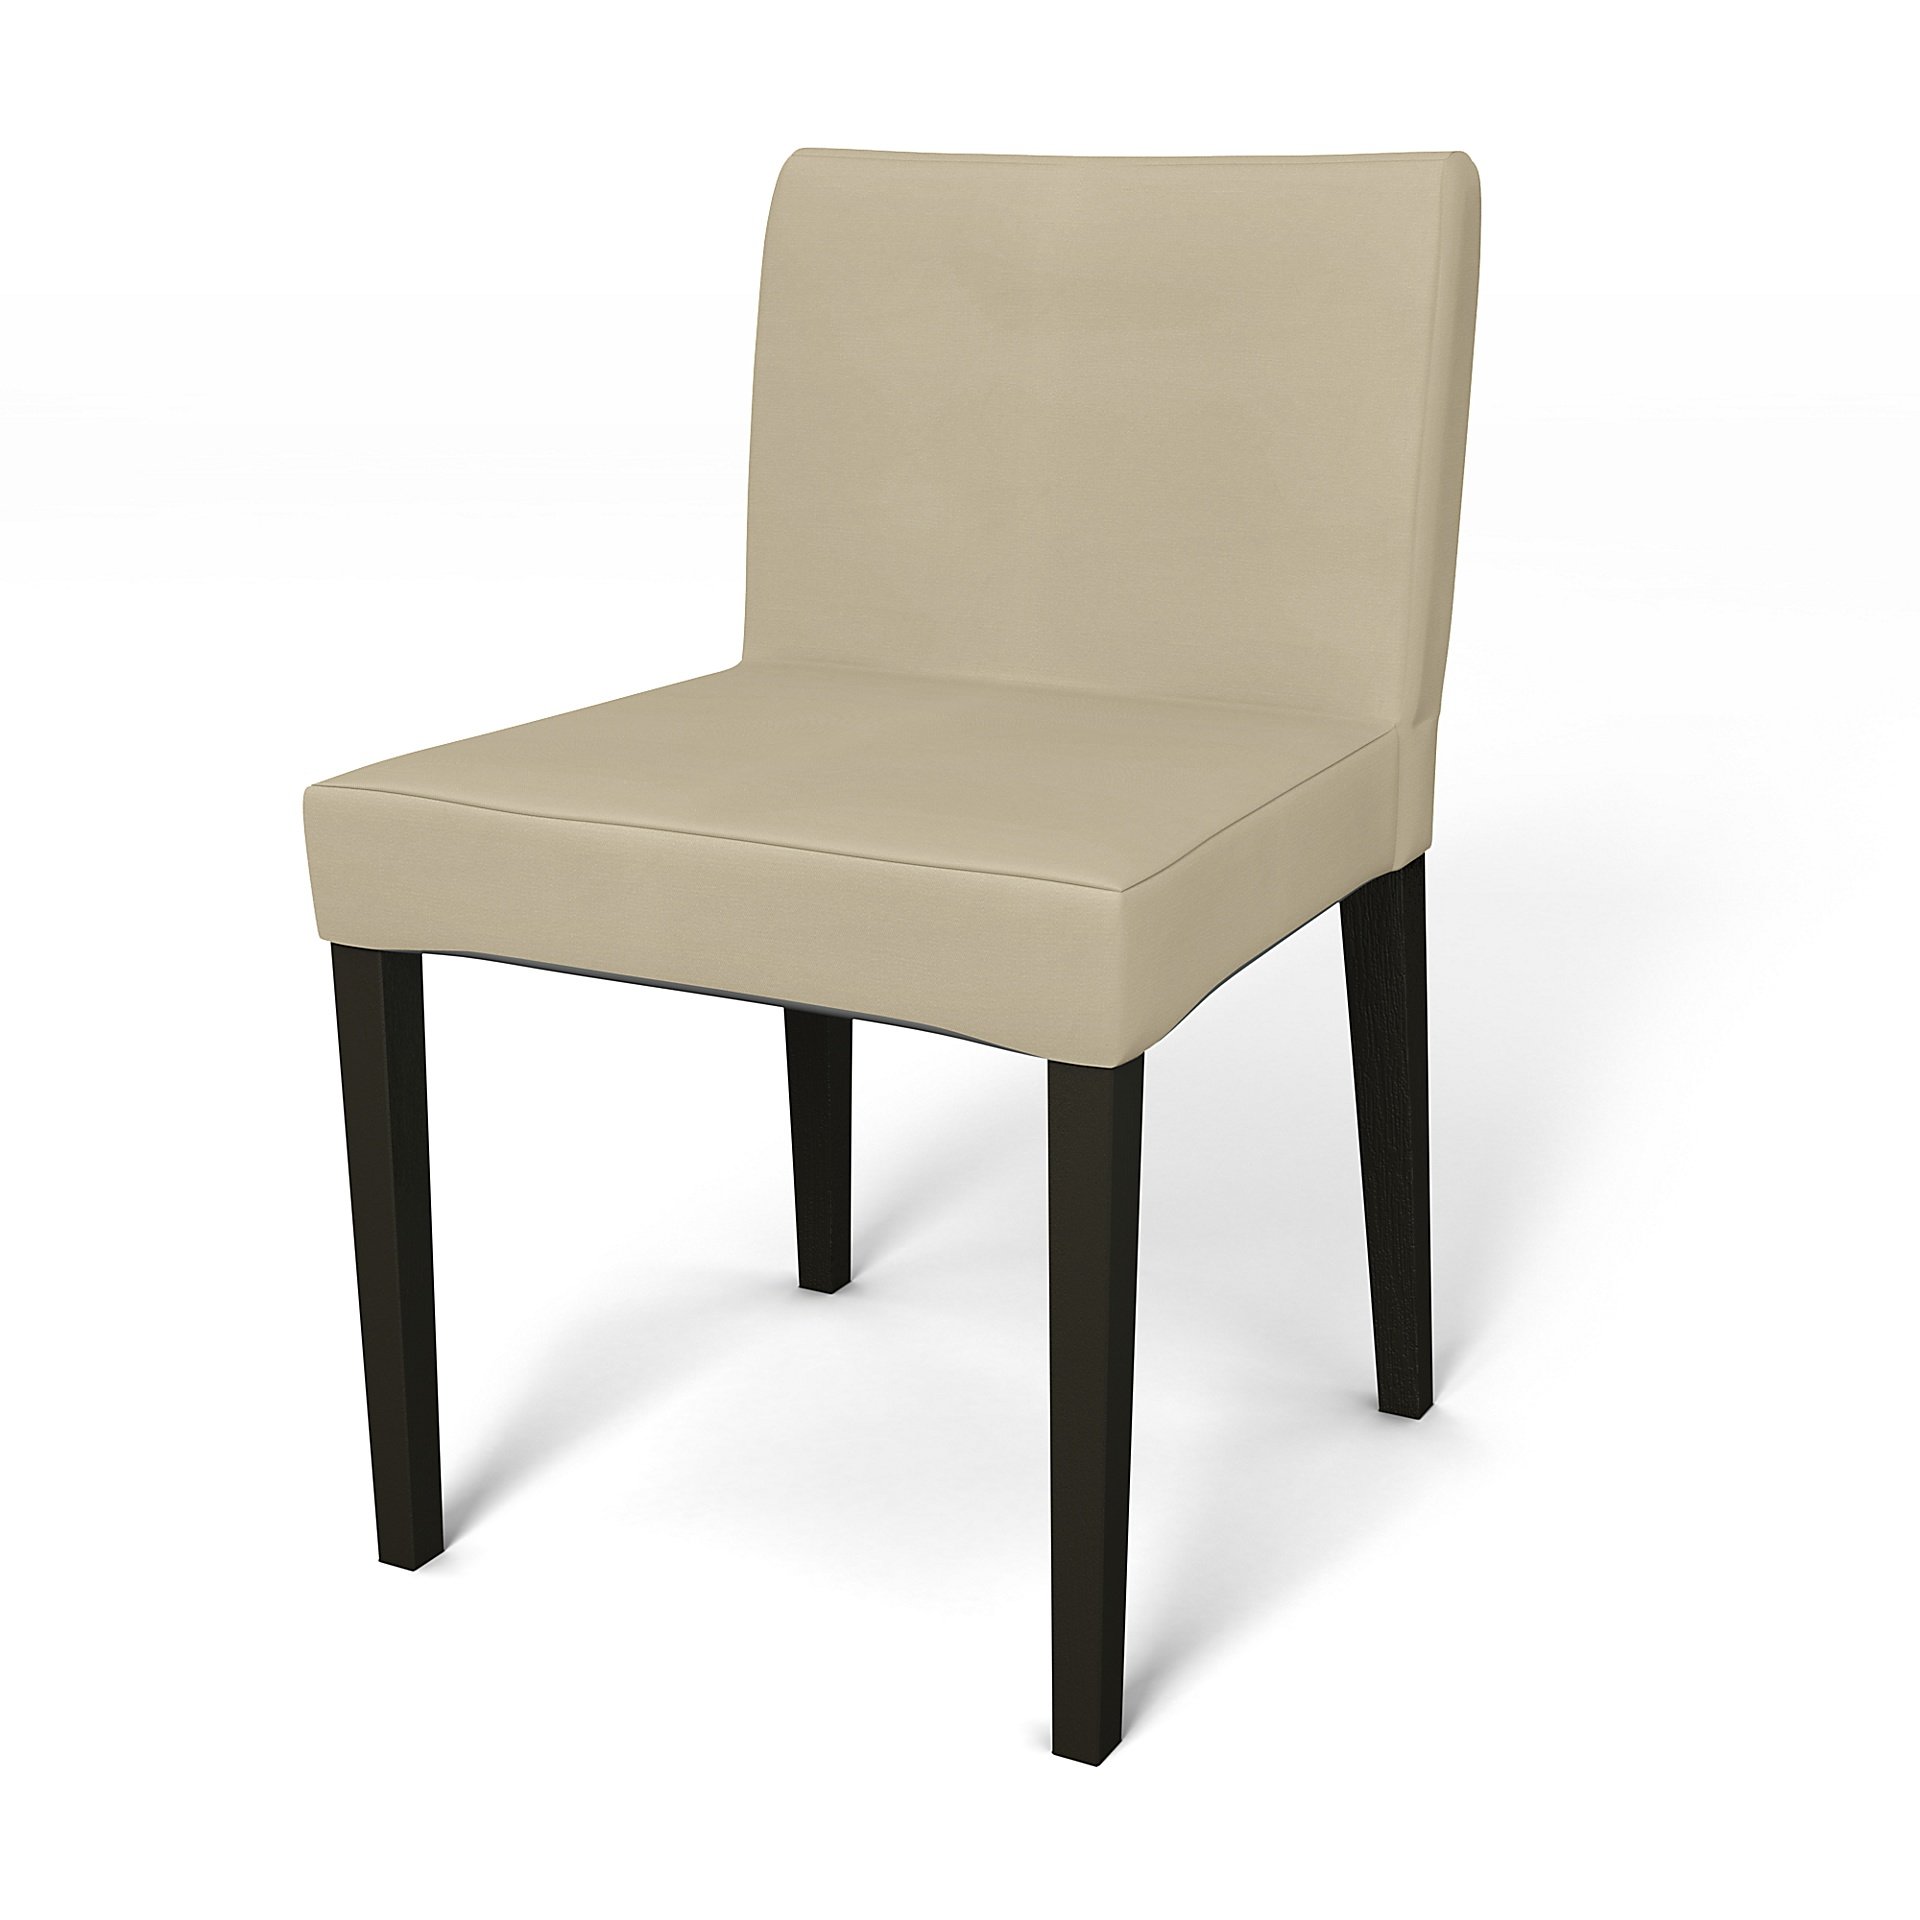 IKEA - Nils Dining Chair Cover, Sand Beige, Cotton - Bemz